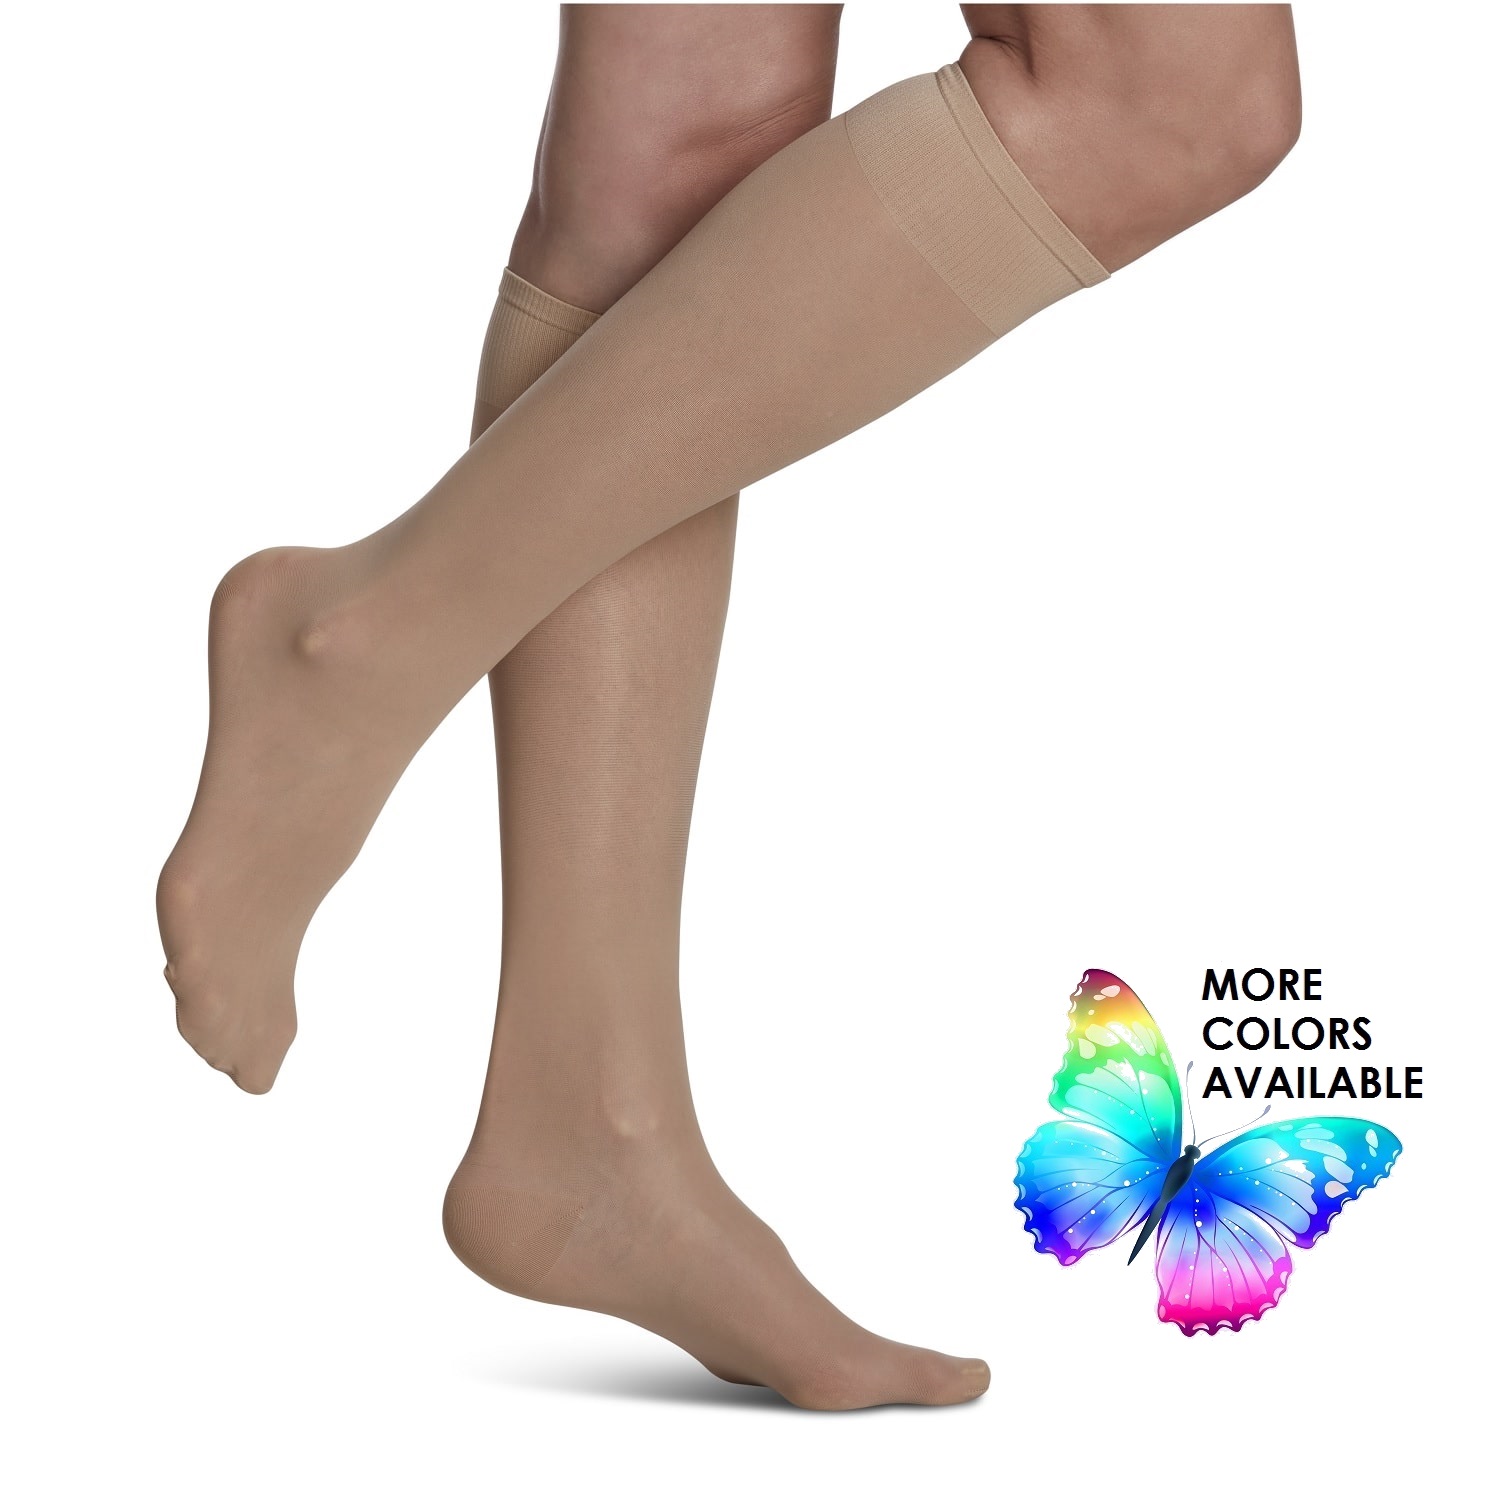 Sigvaris Women's Sheer Knee-High Compression Stockings 15-20 mmHg